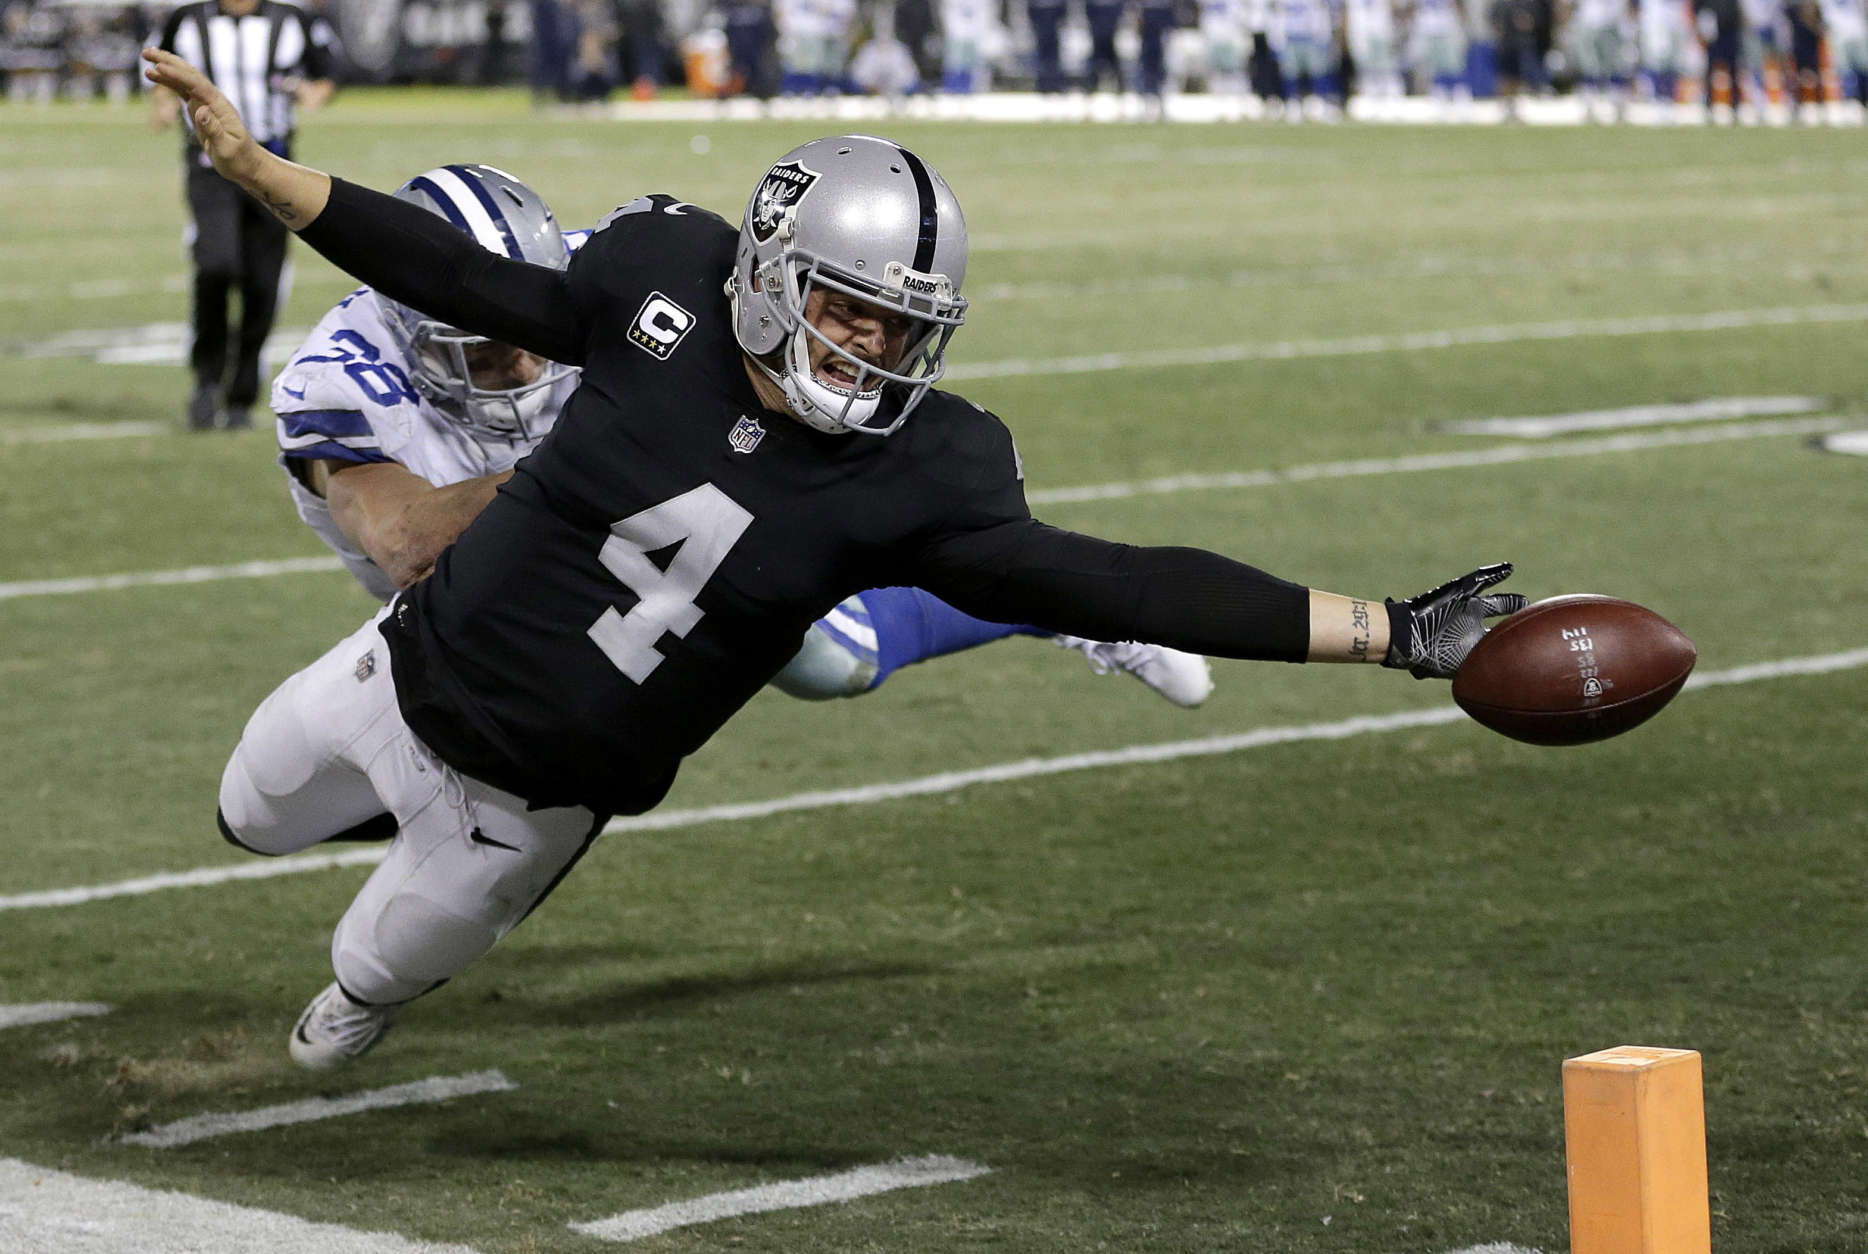 Oakland Raiders quarterback Derek Carr (4) fumbles the ball into the end zone in front of Dallas Cowboys strong safety Jeff Heath (38) during the second half of an NFL football game in Oakland, Calif., Sunday, Dec. 17, 2017. The play was ruled a touchback and the Cowboys got possession. The Cowboys won 20-17. (AP Photo/Ben Margot)